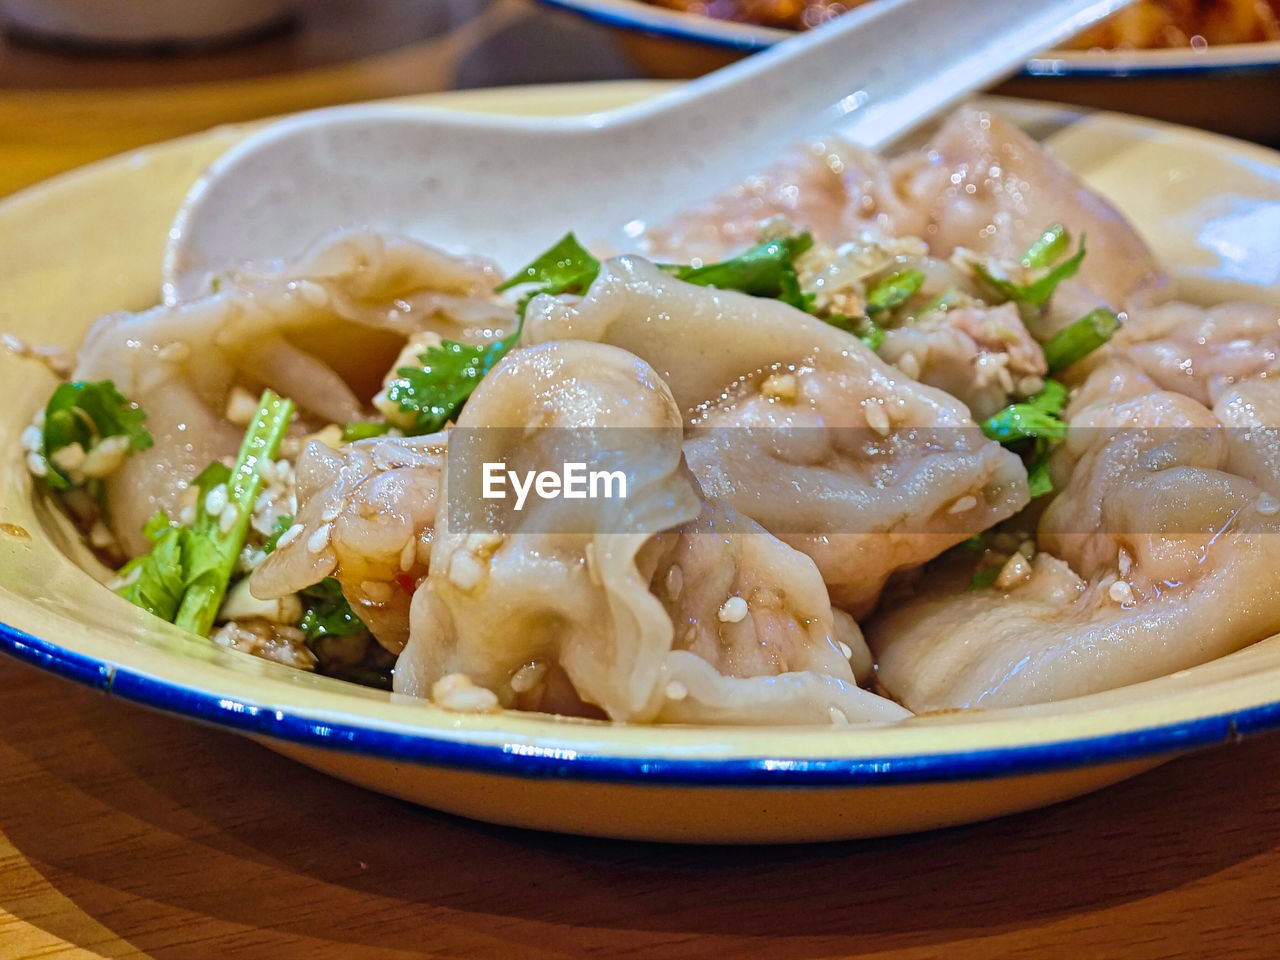 food and drink, food, healthy eating, asian food, wellbeing, dish, freshness, cuisine, vegetable, chinese food, meal, no people, seafood, plate, meat, indoors, dumpling, table, close-up, bowl, crockery, thai food, restaurant, business, focus on foreground, serving size